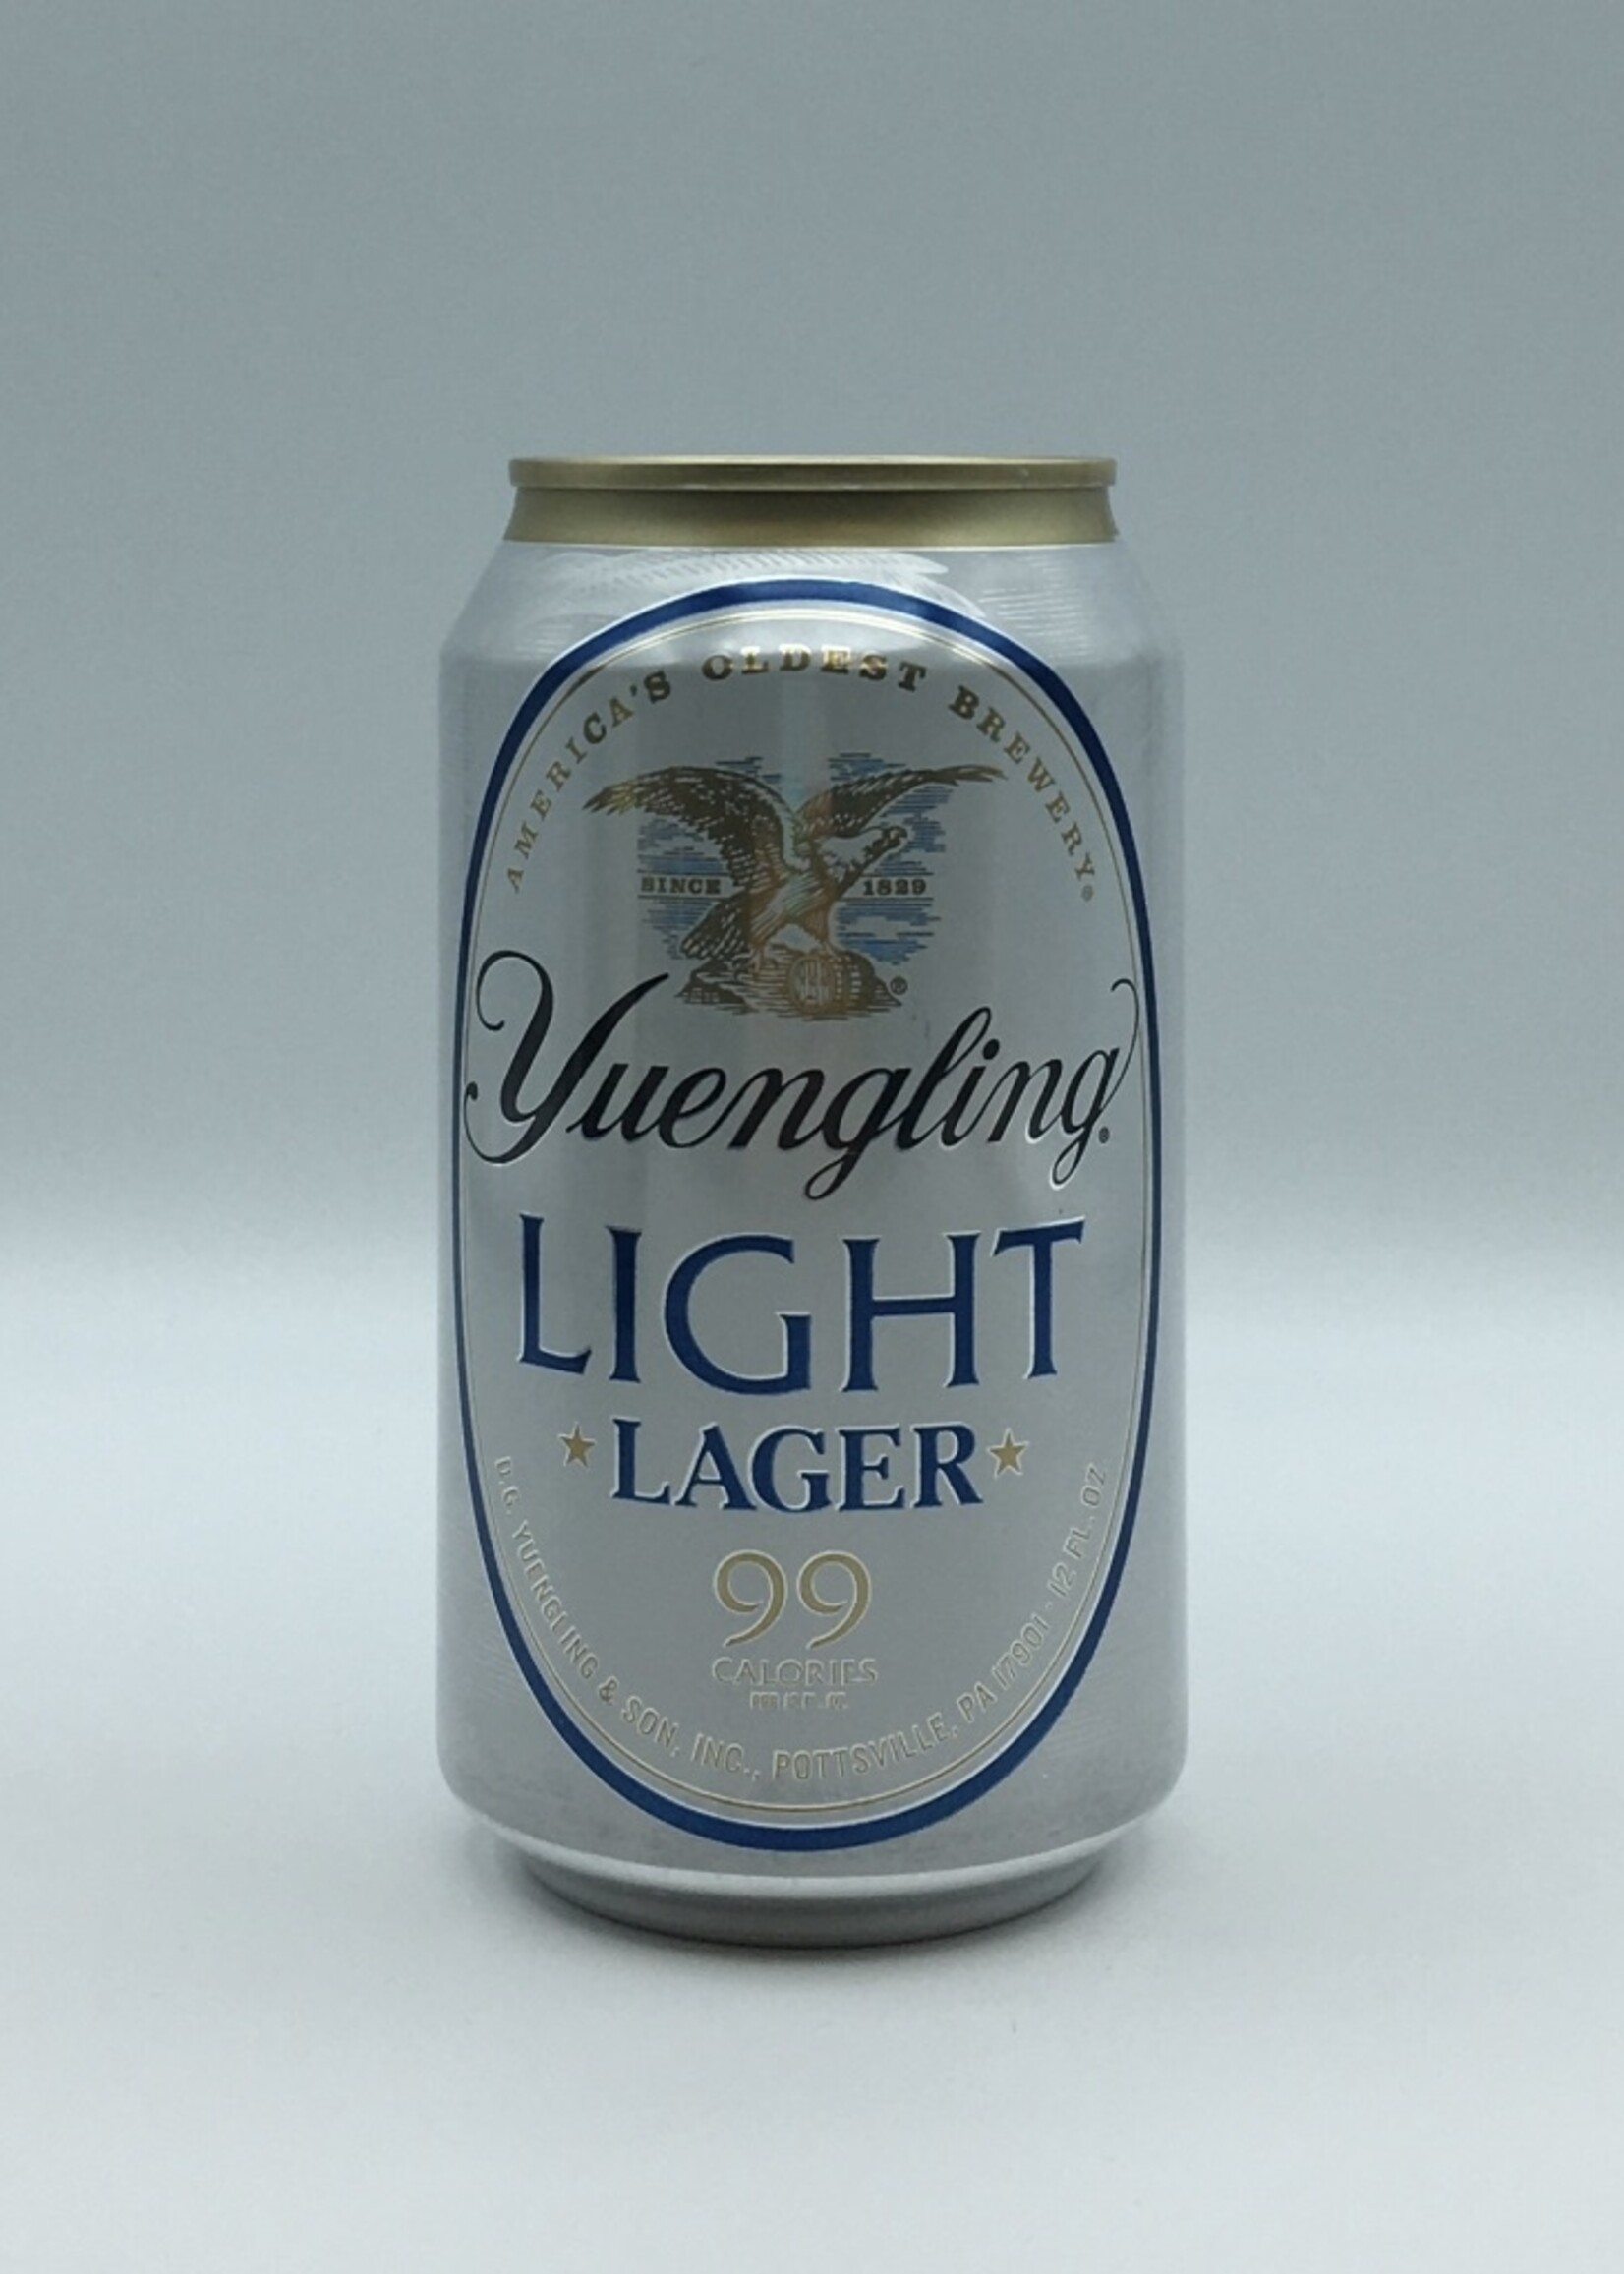 Yuengling Light Lager Cans 12PK 12OZ C